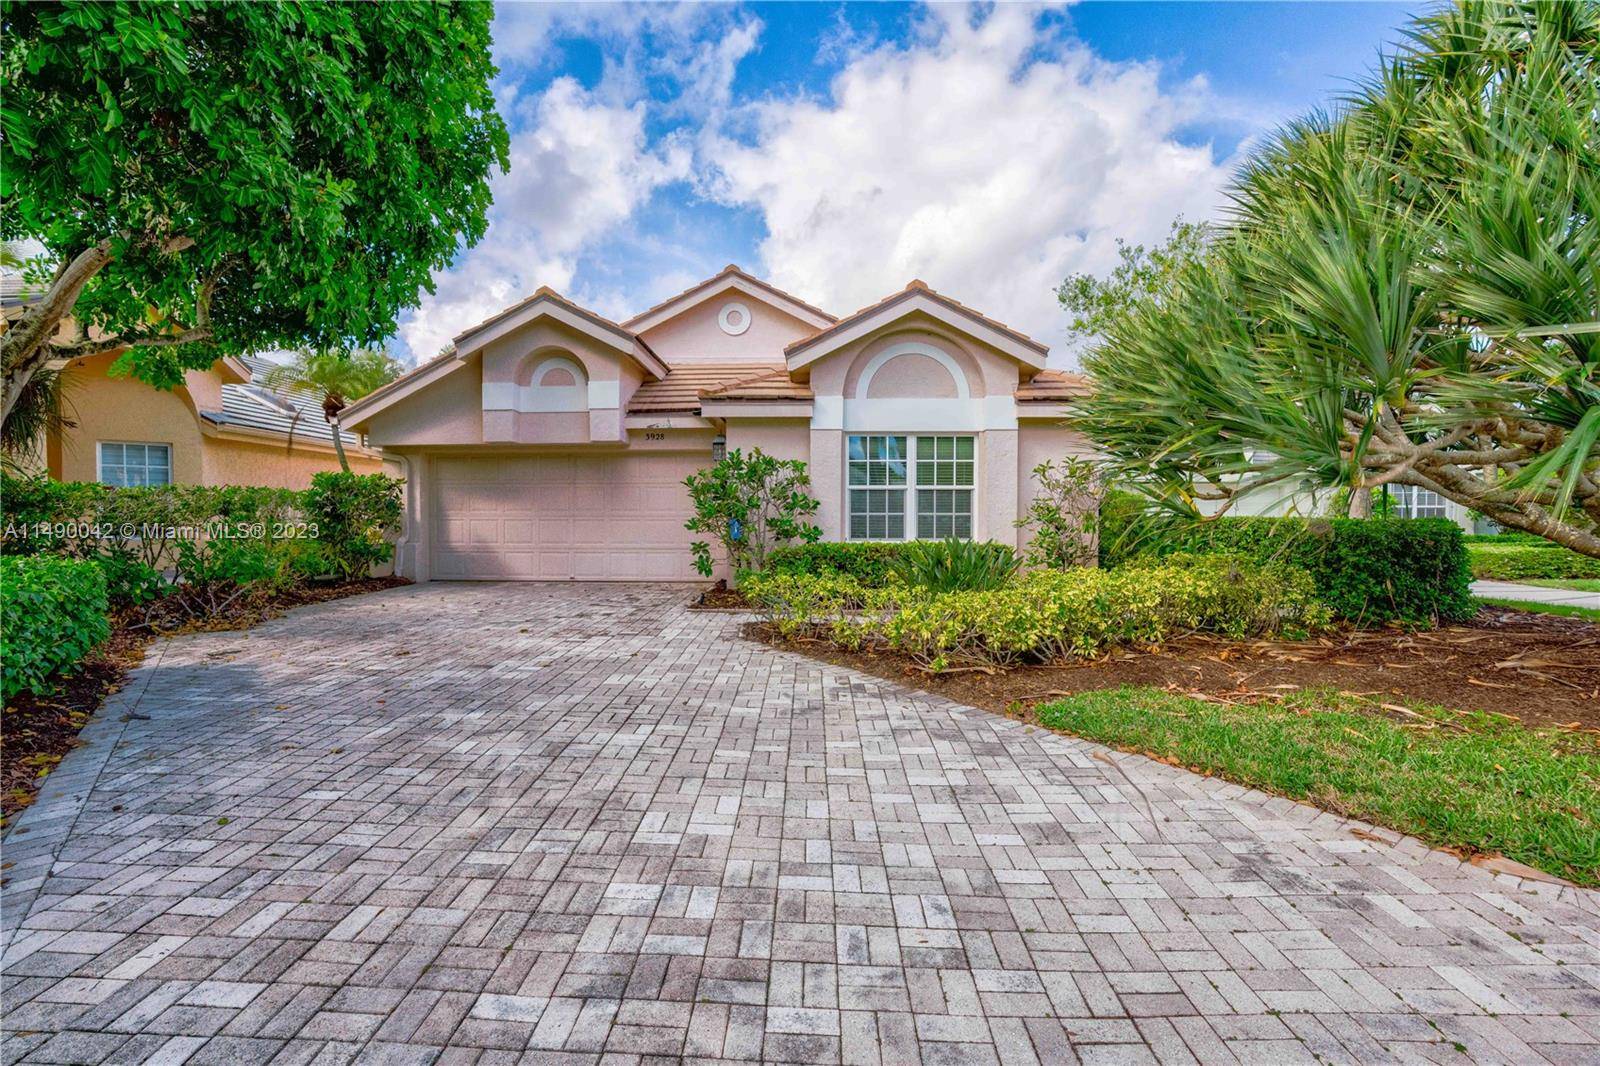 Welcome to this charming home nestled within a serene golf community.